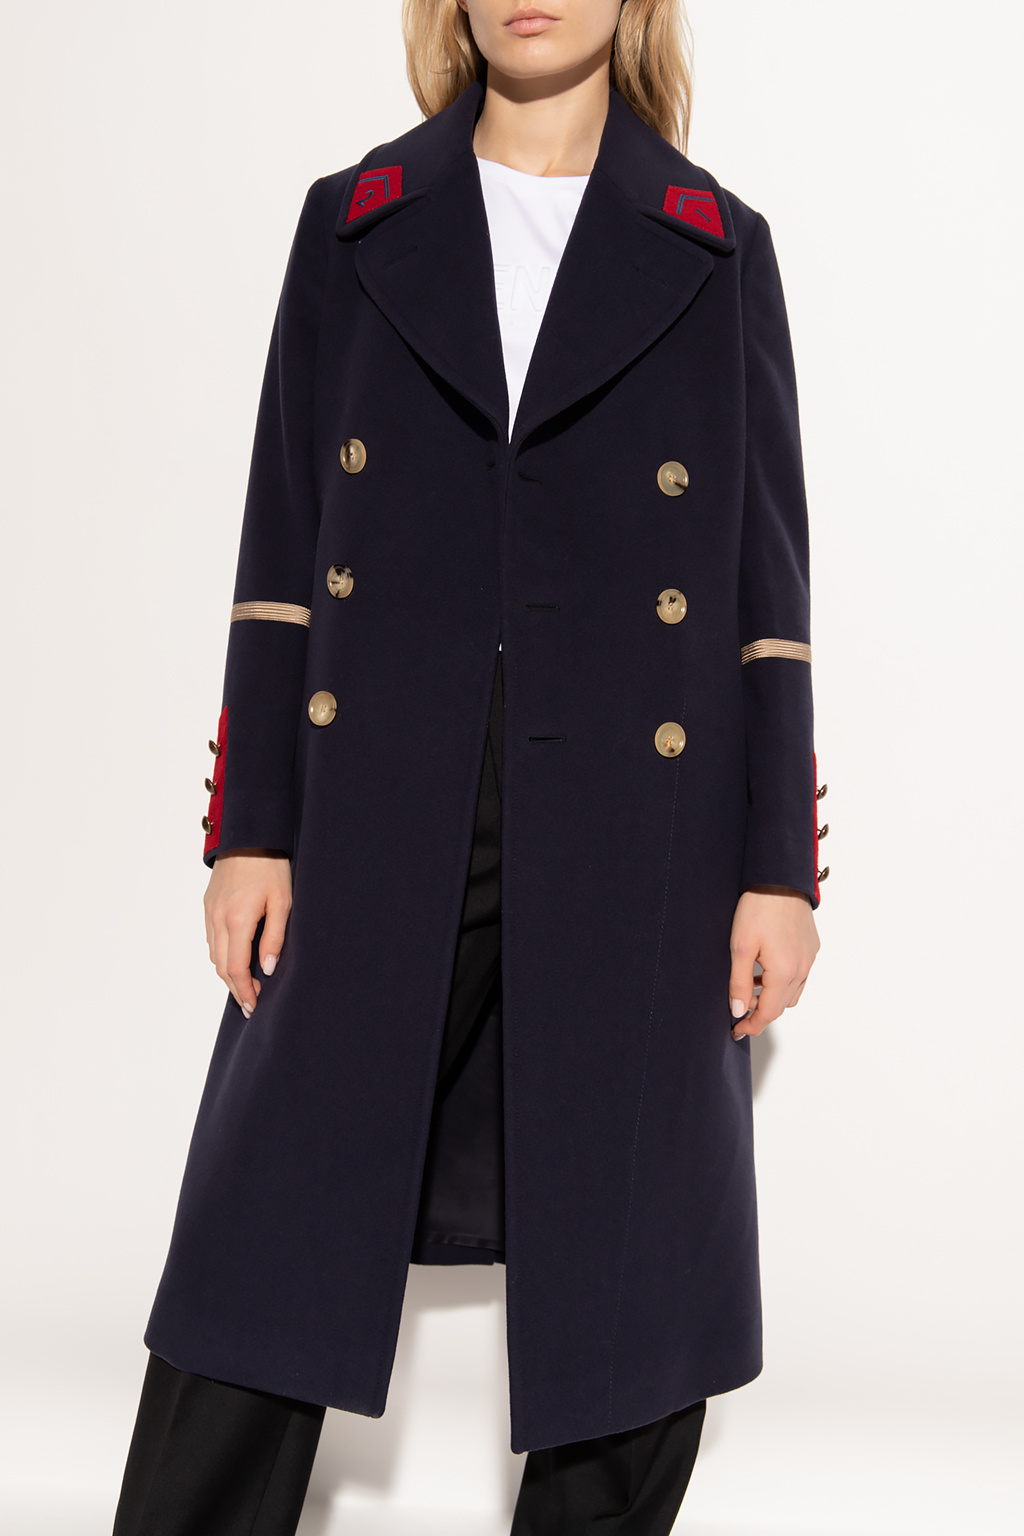 gucci rhombus Double-breasted coat